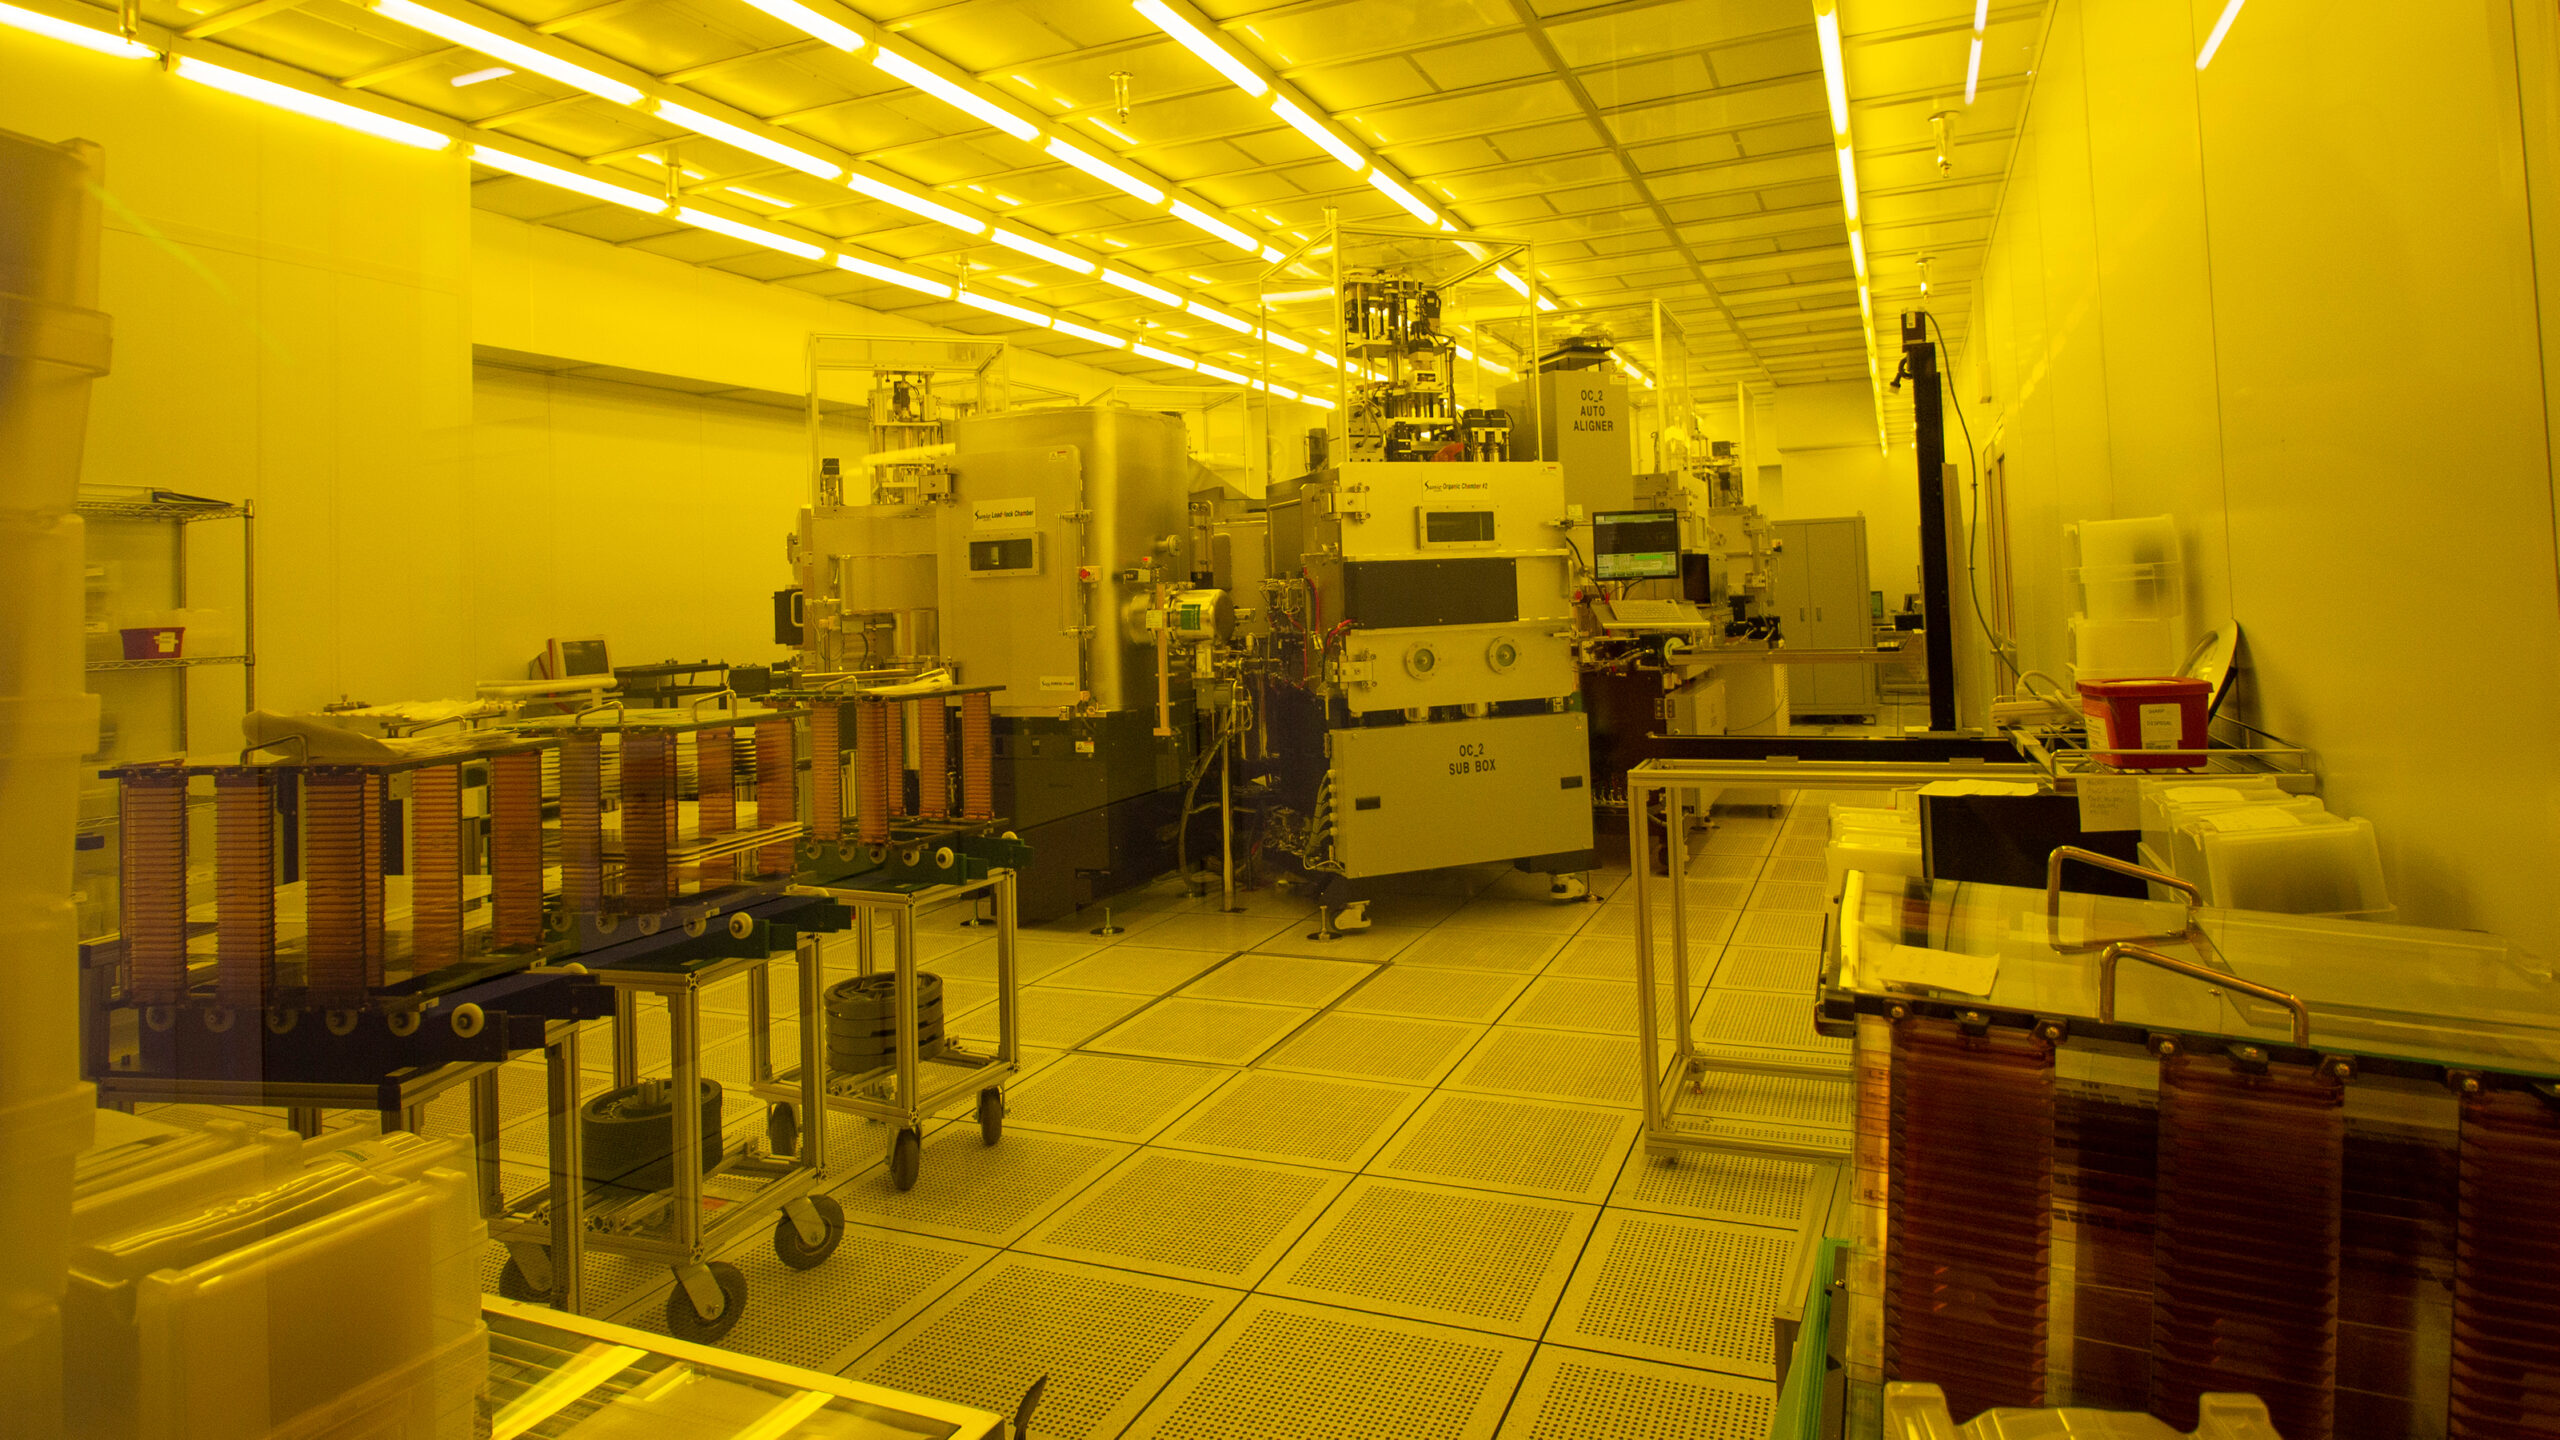 Interior view of ASU's MacroTechnology Works lab under golden yellow light